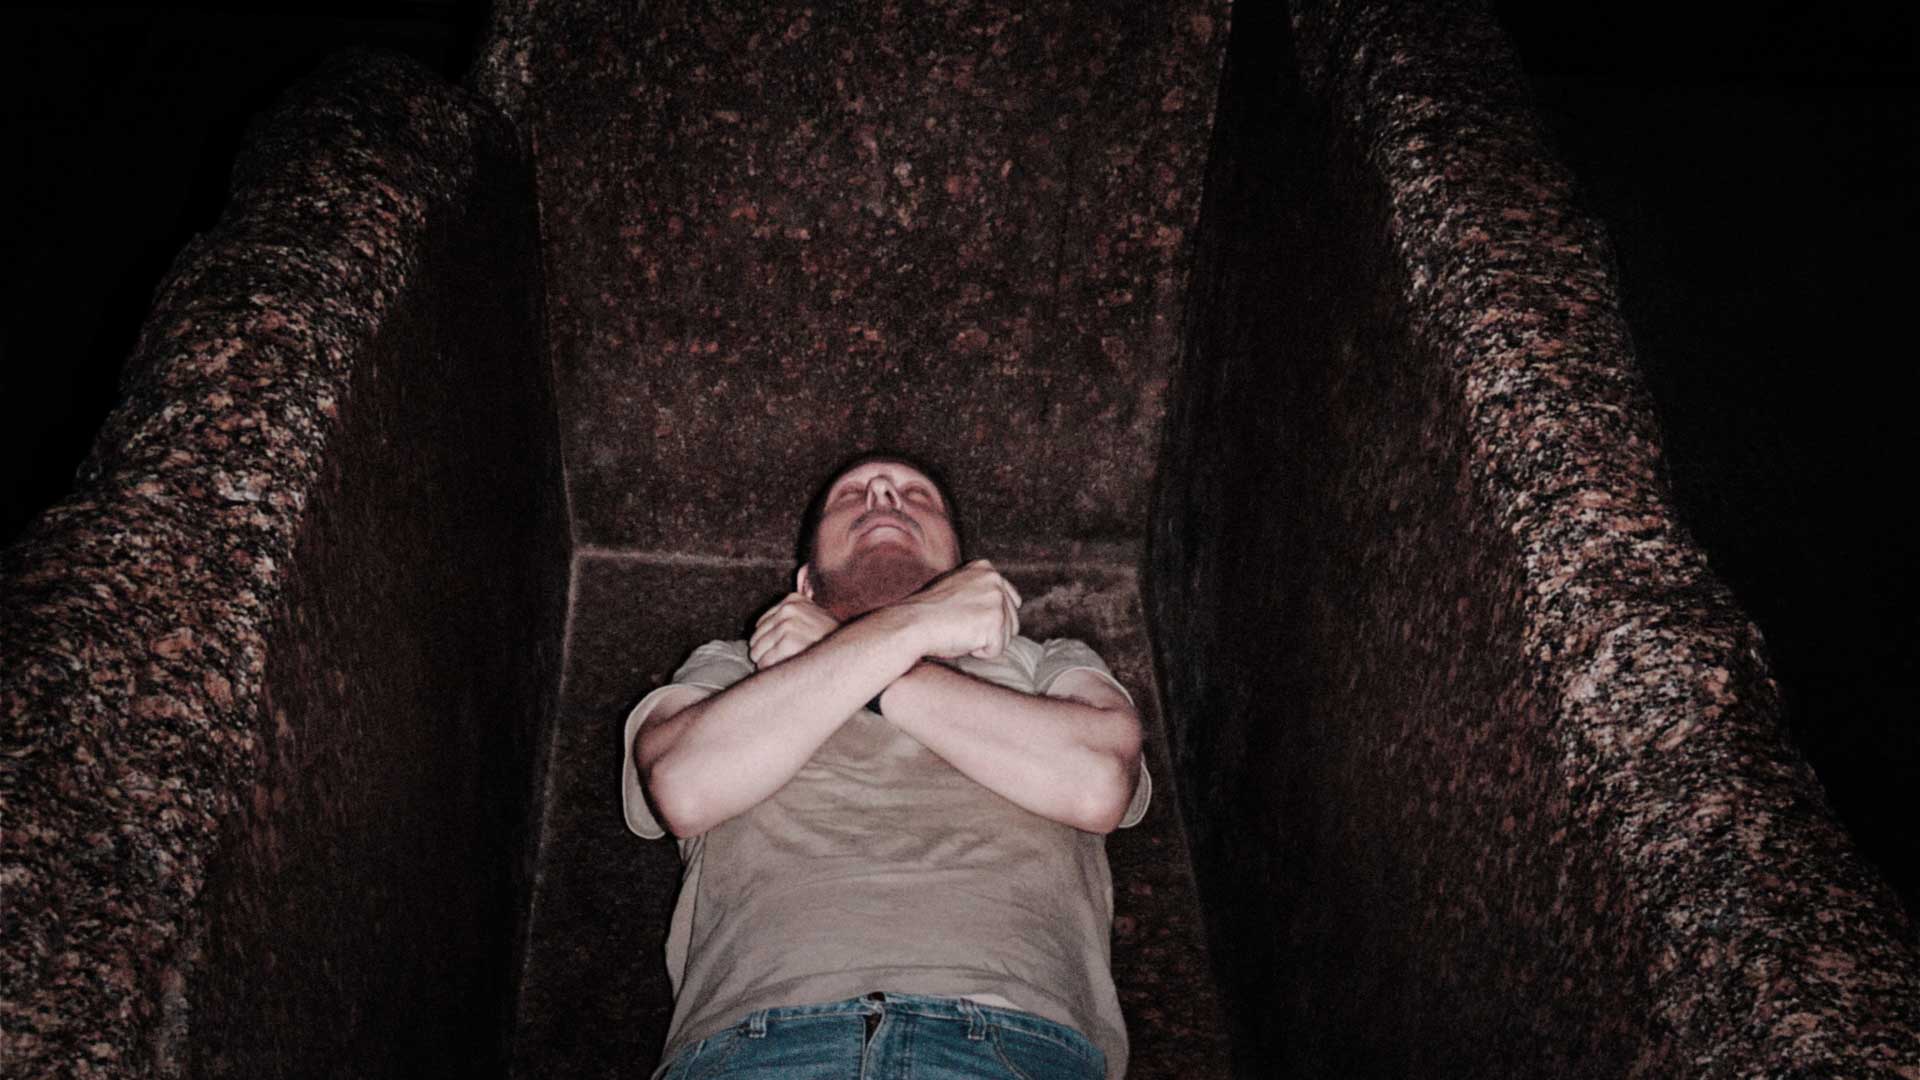 Gregor Spörri meditates during his overnight stay in the pyramid of Cheops in the Royal Chamber sarcophagus (1988).